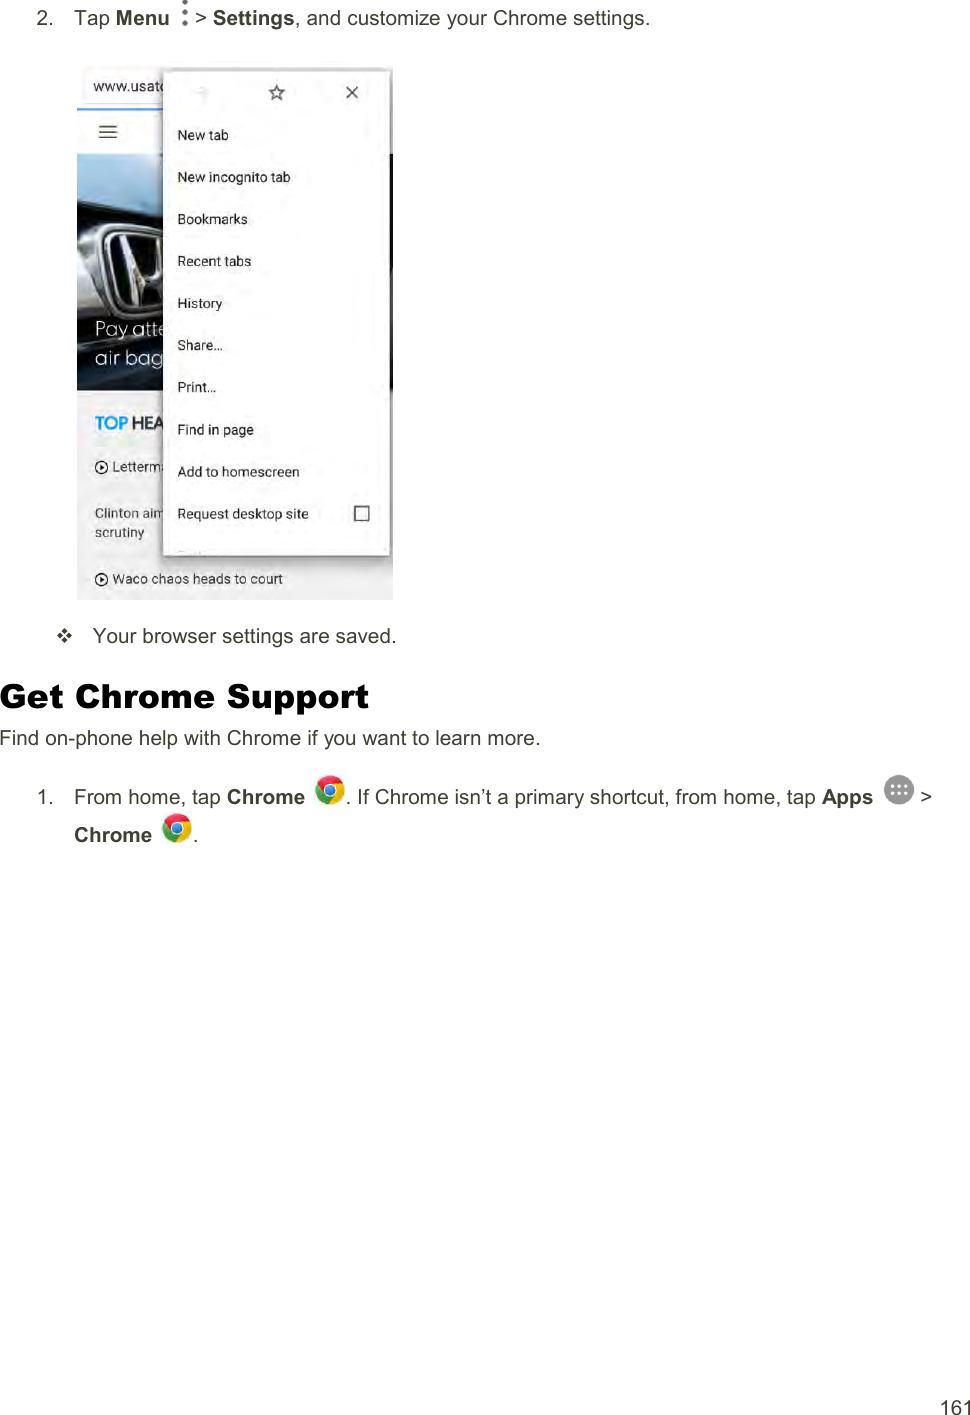  161 2.  Tap Menu   &gt; Settings, and customize your Chrome settings.     Your browser settings are saved. Get Chrome Support Find on-phone help with Chrome if you want to learn more. 1.  From home, tap Chrome  . If Chrome isn’t a primary shortcut, from home, tap Apps   &gt; Chrome  . 